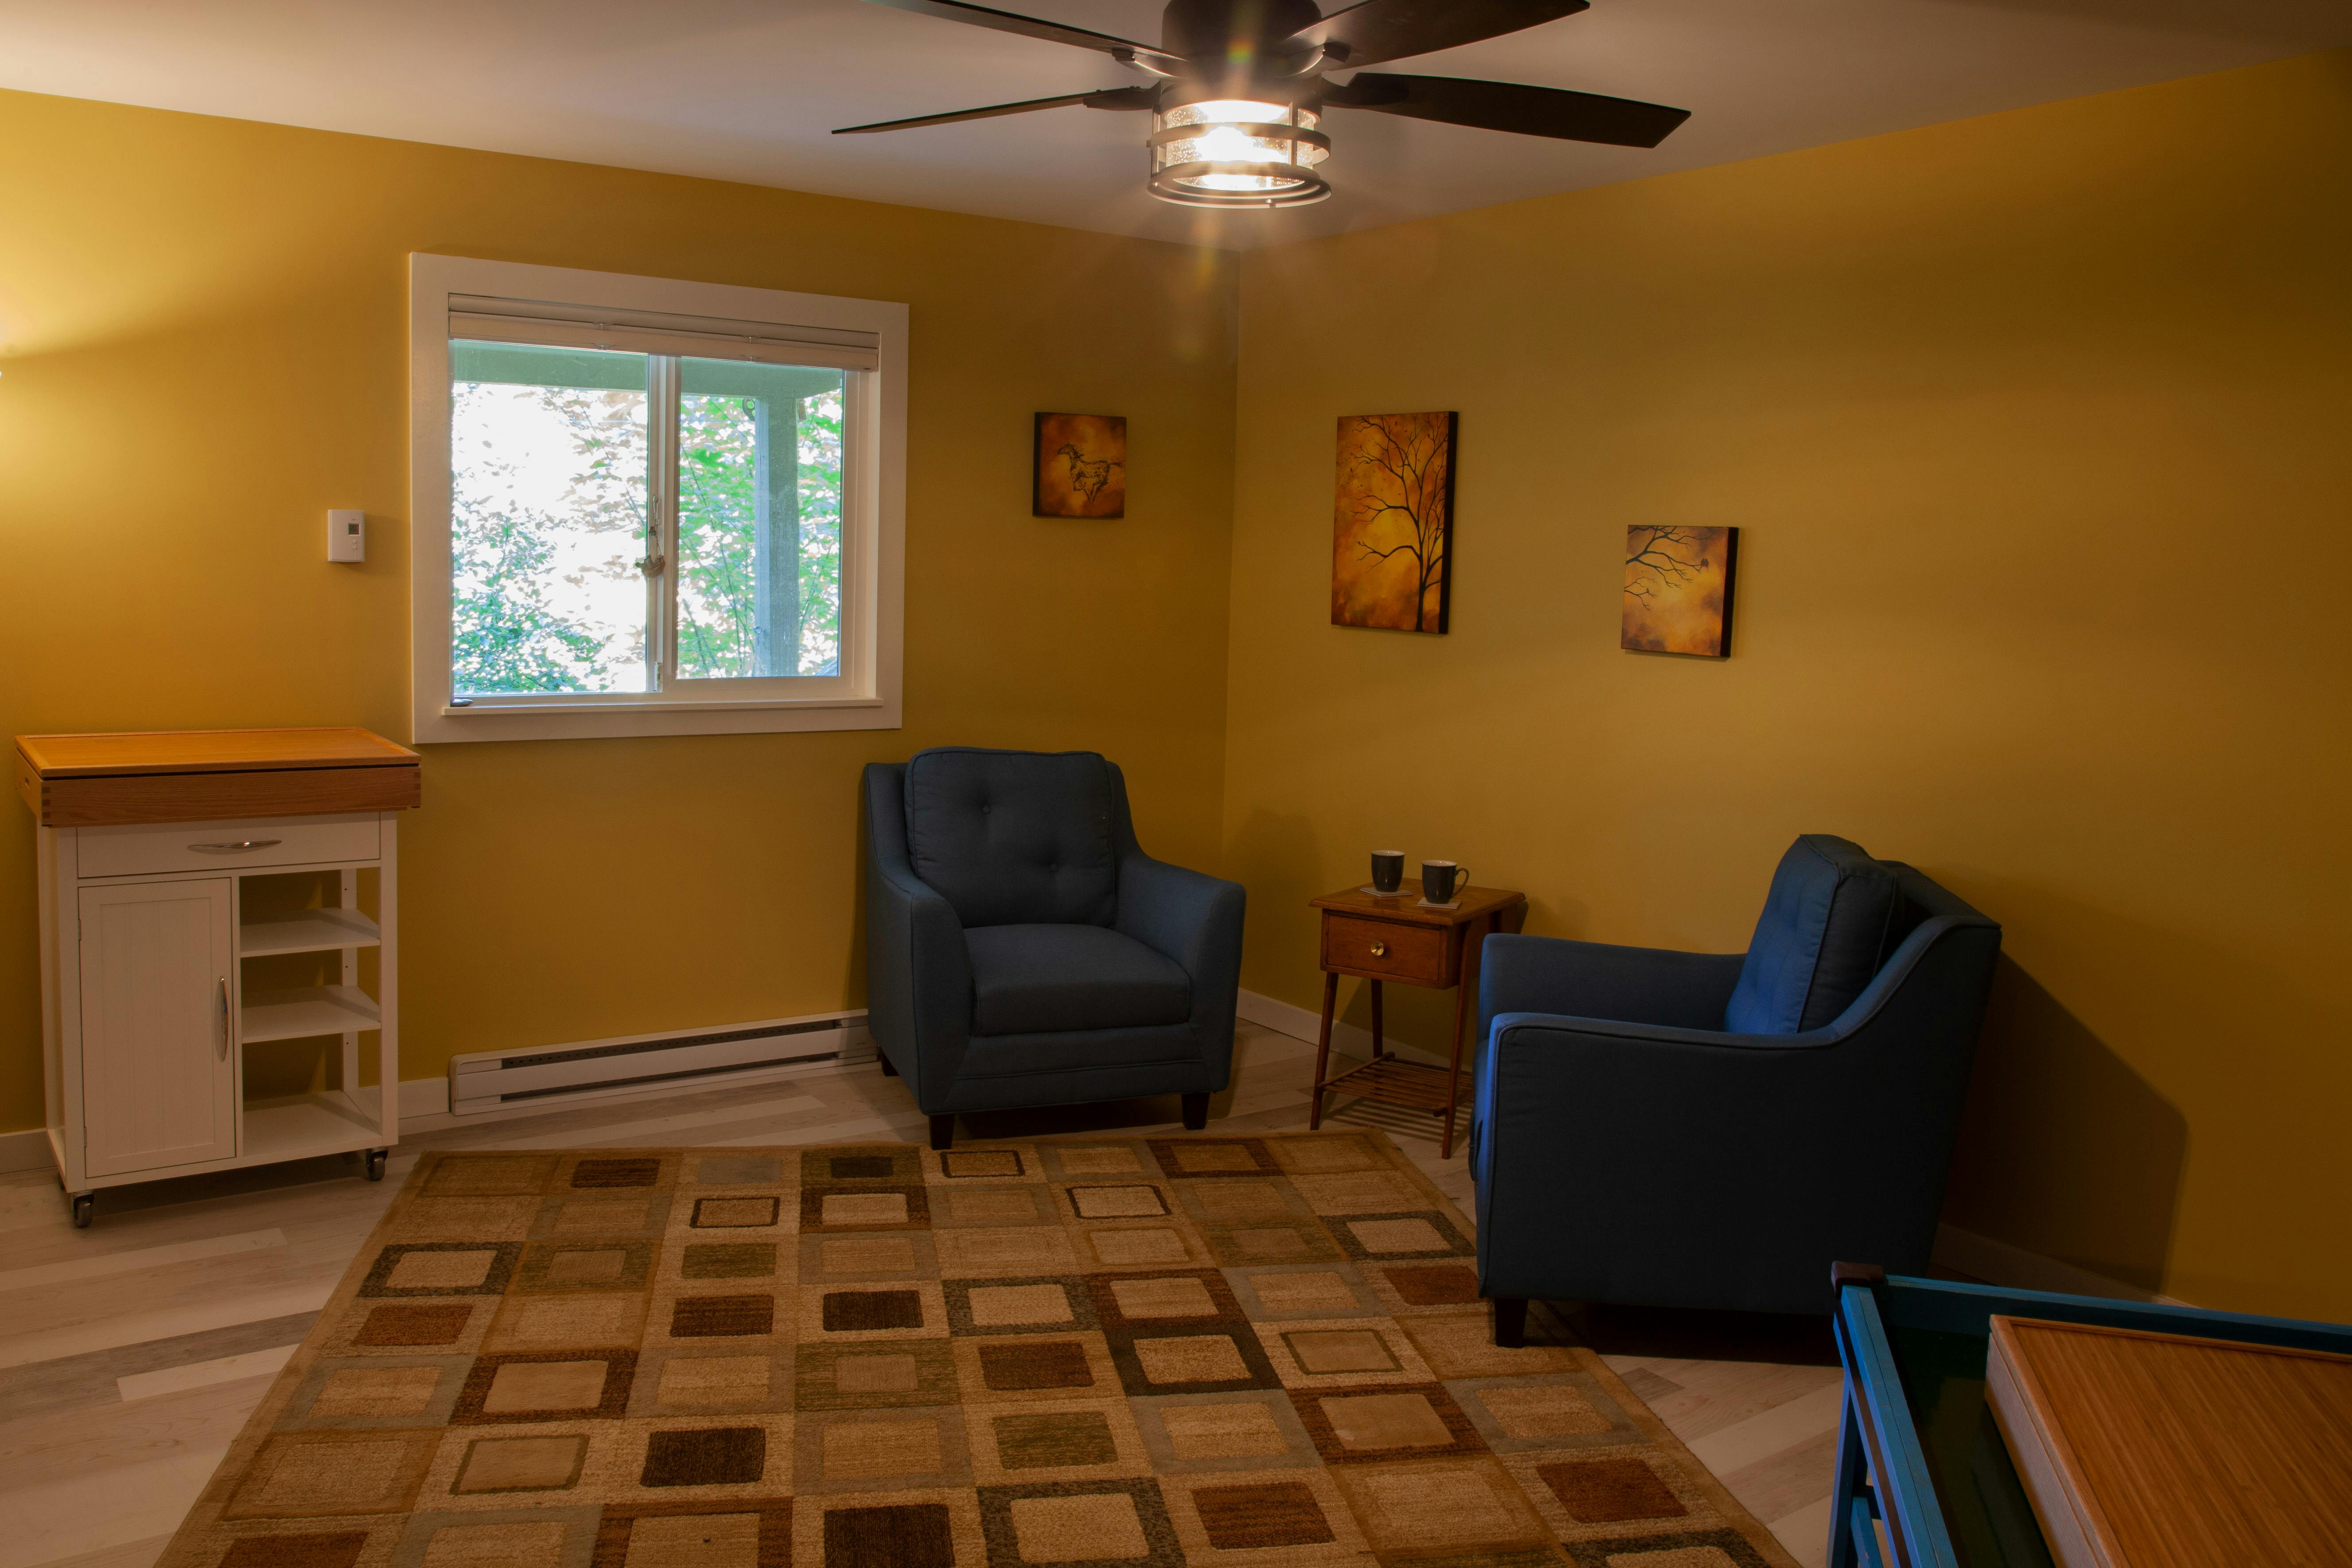 A photo of an interior room with two blue chairs, yellow walls, a rug, and a window looking out on trees